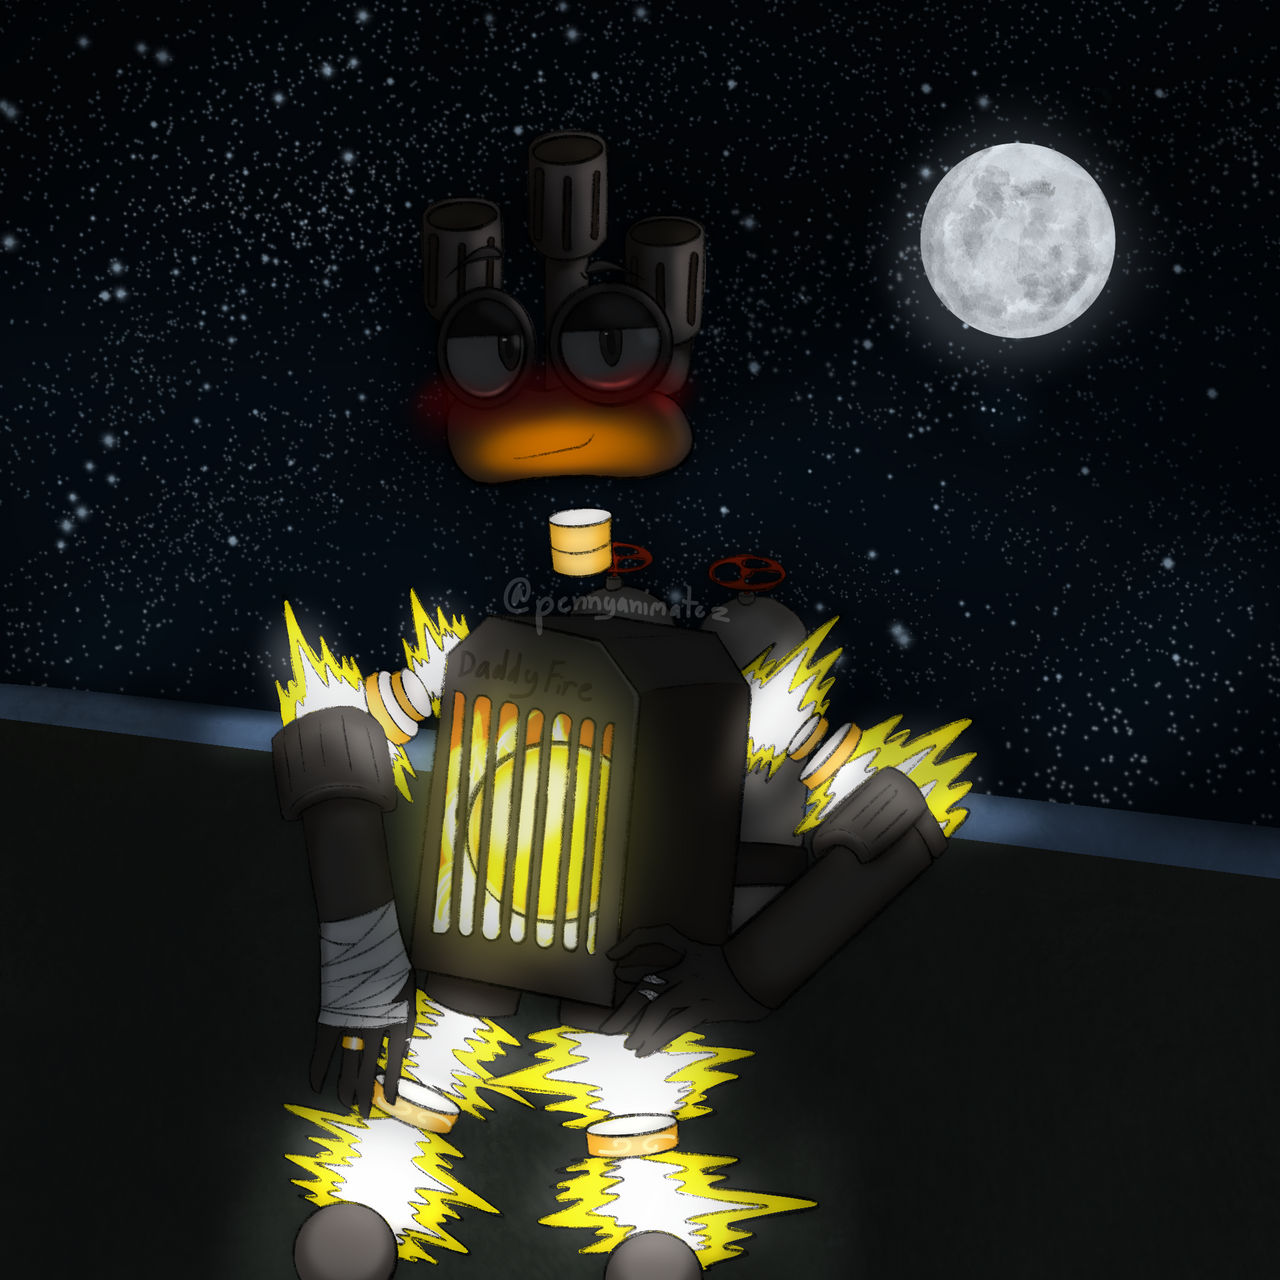 Just A Fire Haven Epic Wubbox I Made by RentSt on Sketchers United